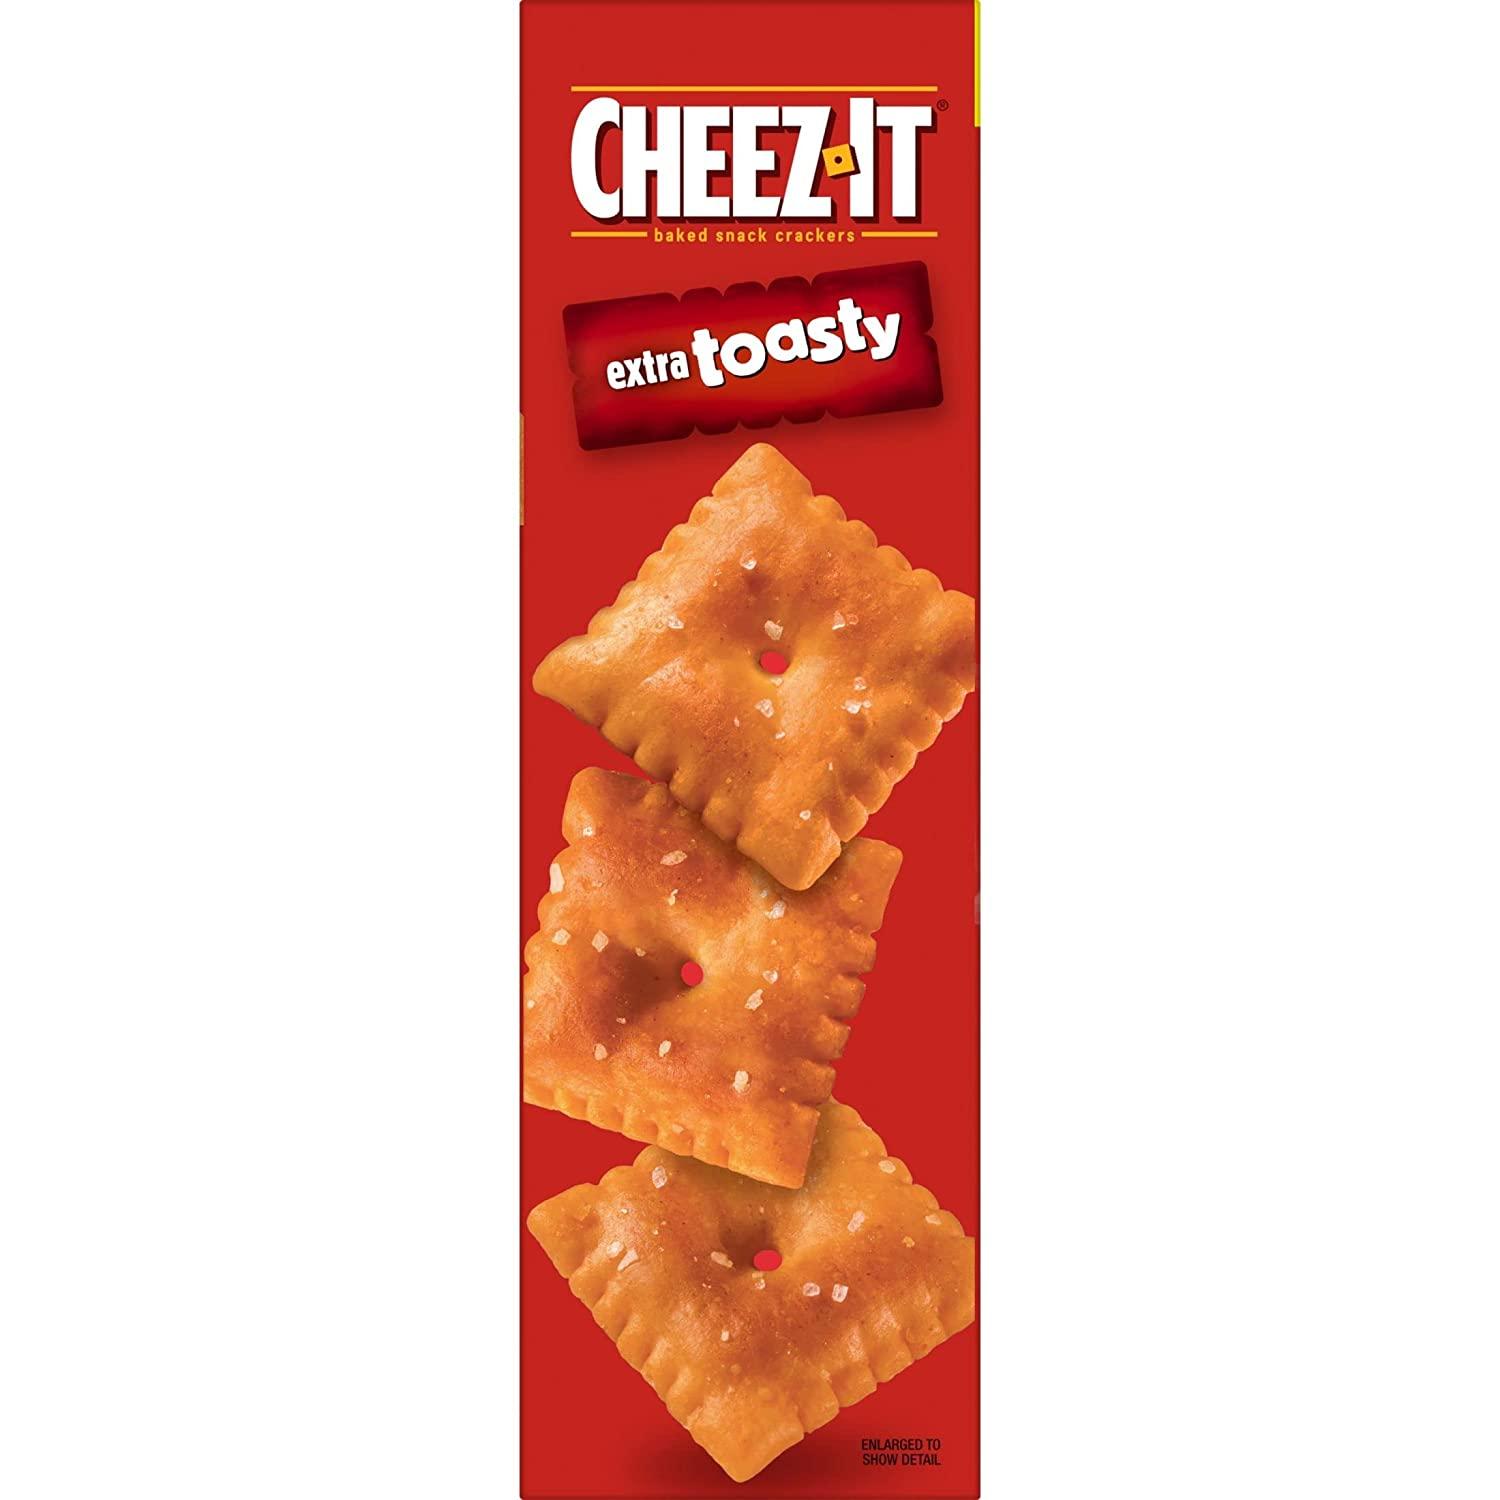 Cheez-It Cheese Crackers, Baked Snack Crackers, Original, 2.2oz Cup